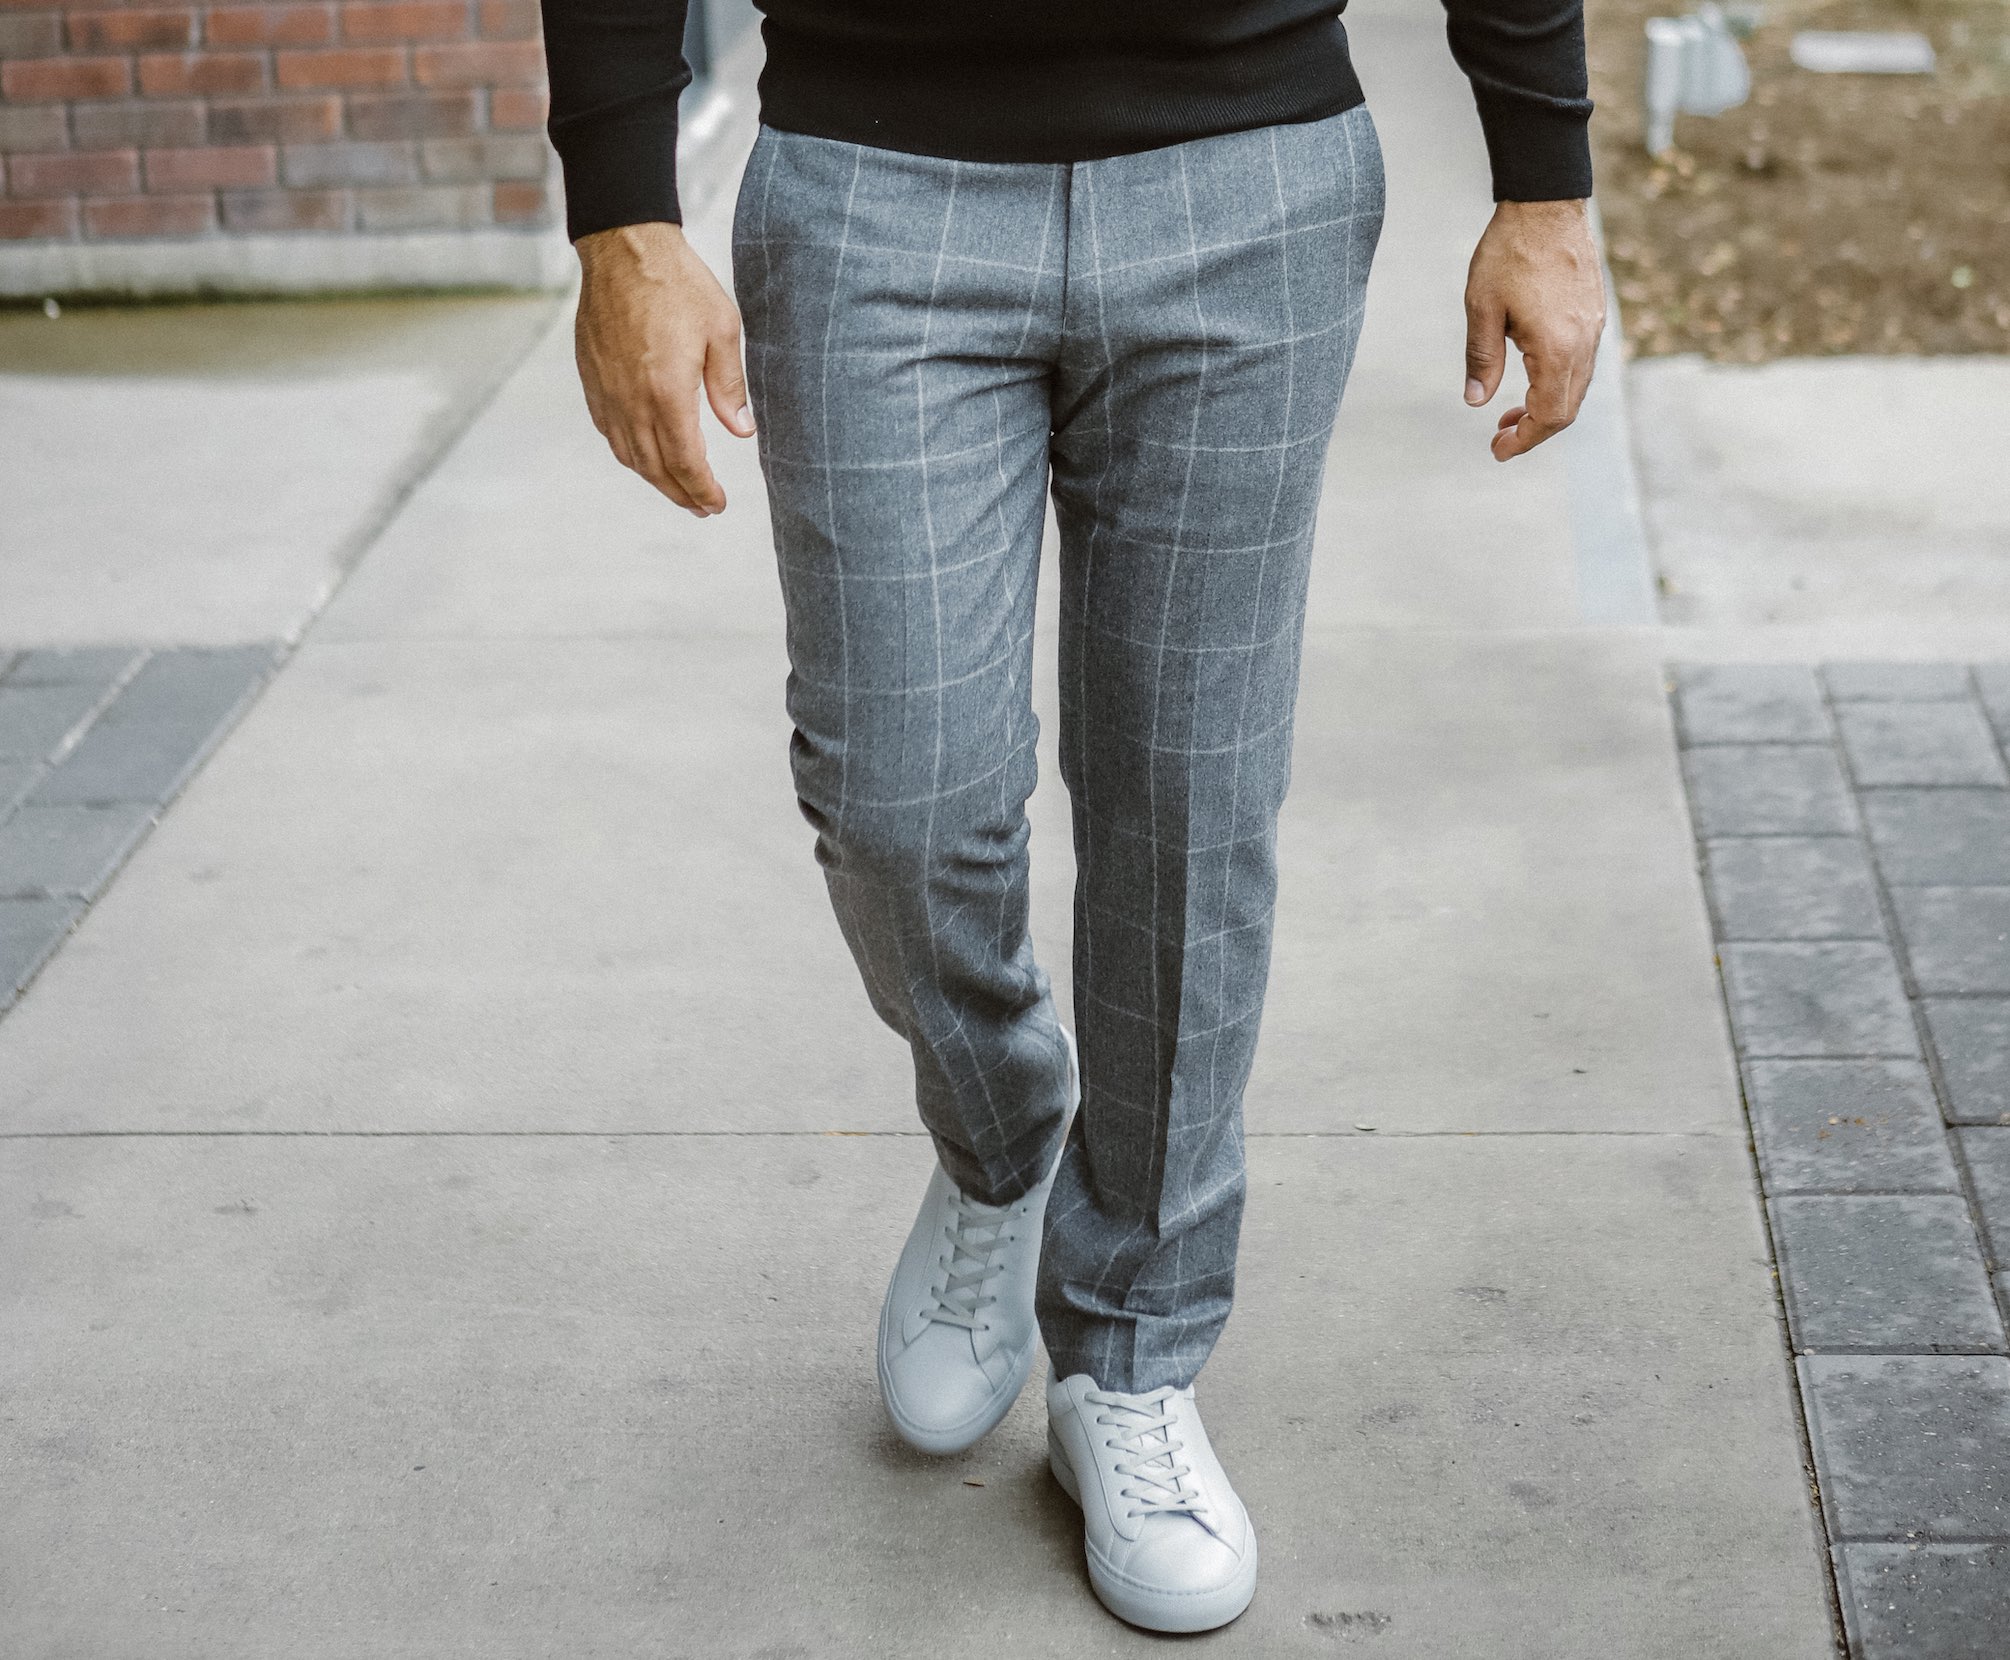 men's casual fashion in their 40s